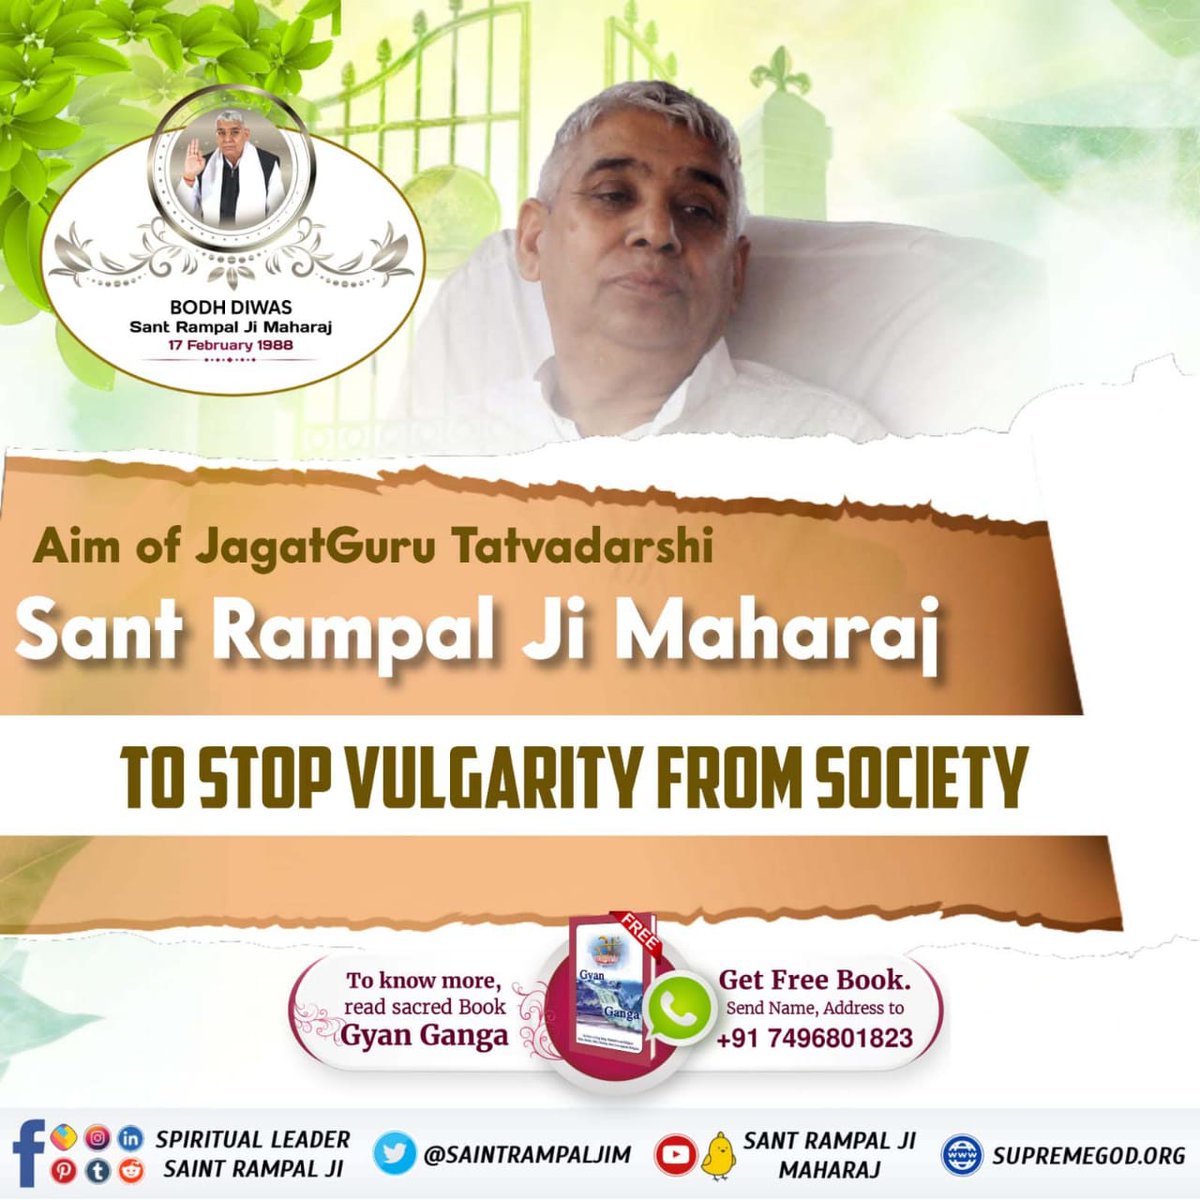 #GodMorningWednesday

Sant Rampal Ji has given a strong message about all religions and that Humanity should dominate all religious pettiness if the human race is to survive.